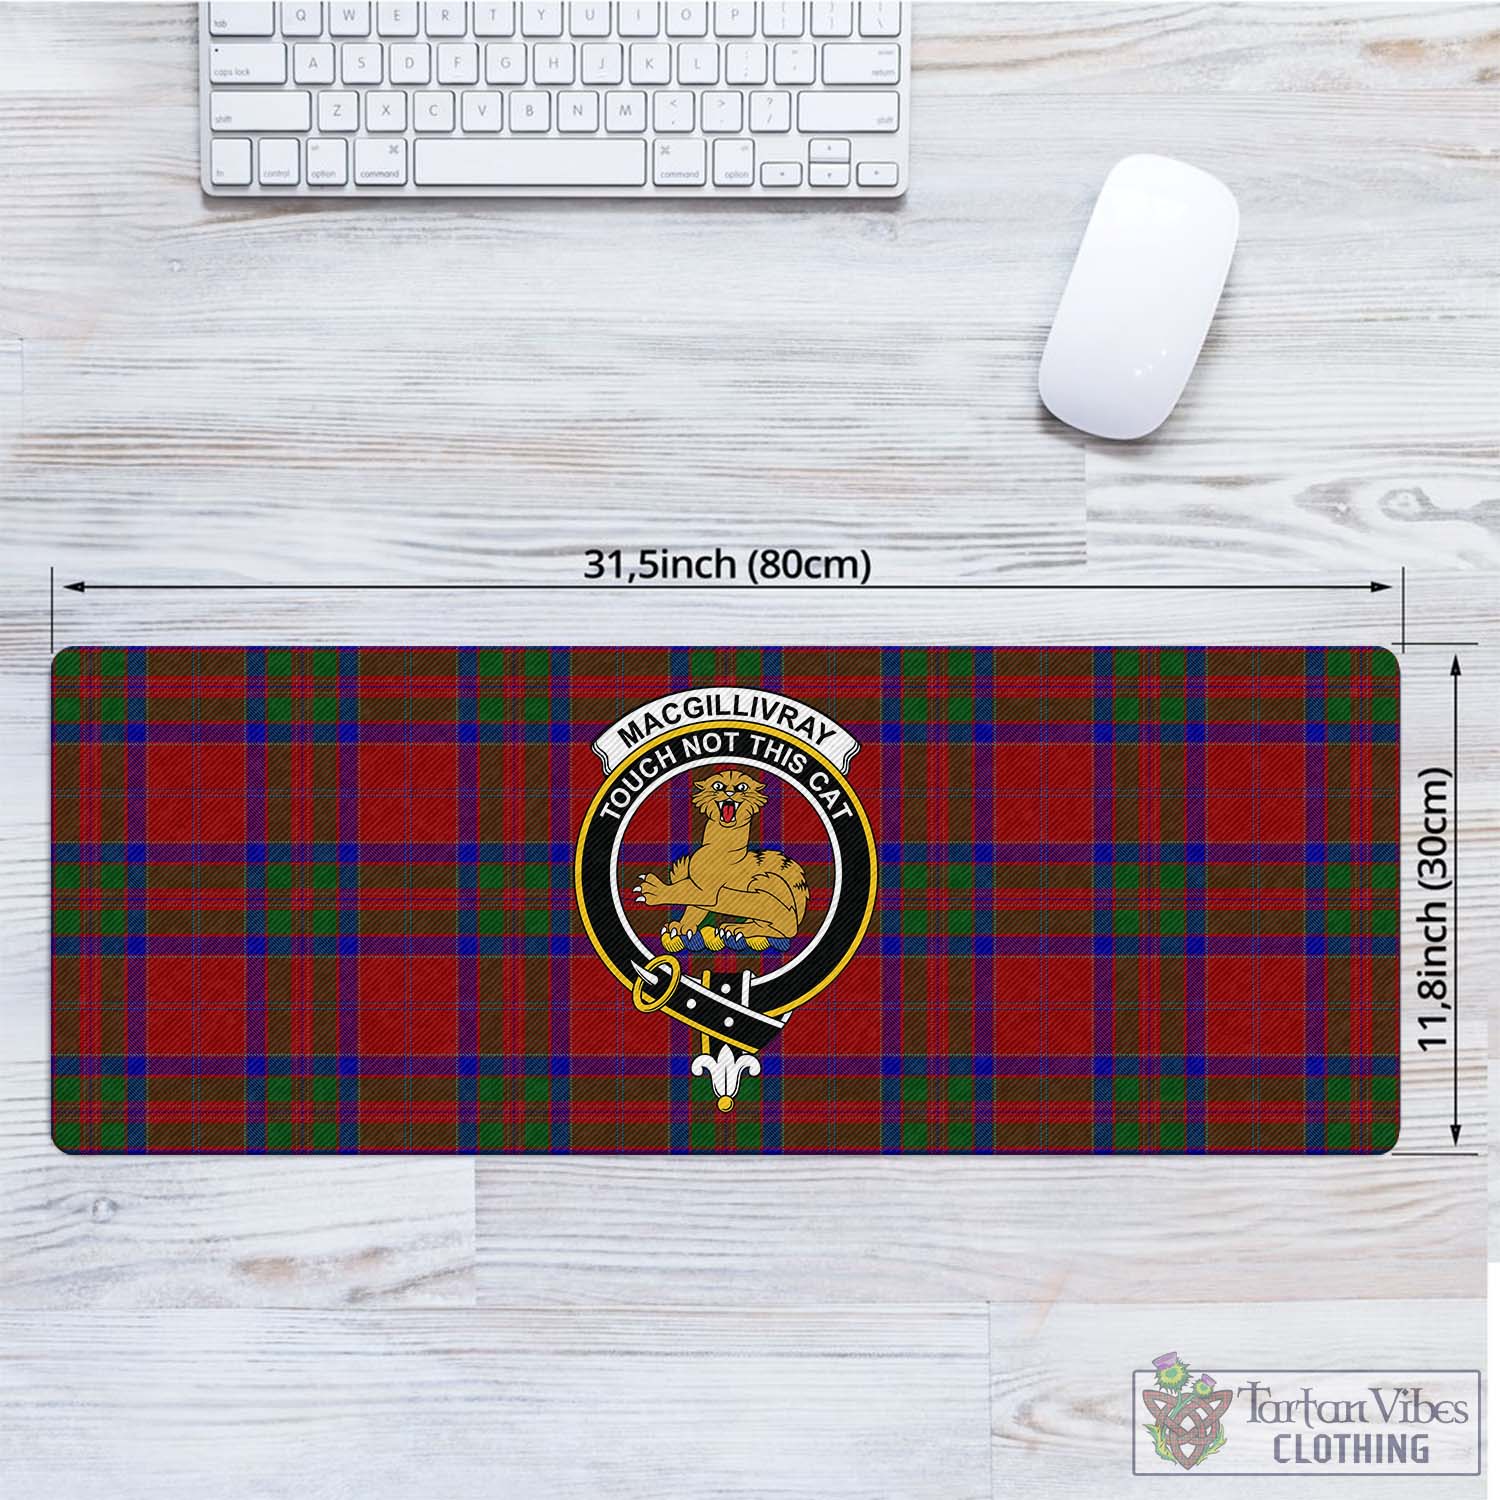 Tartan Vibes Clothing MacGillivray Tartan Mouse Pad with Family Crest